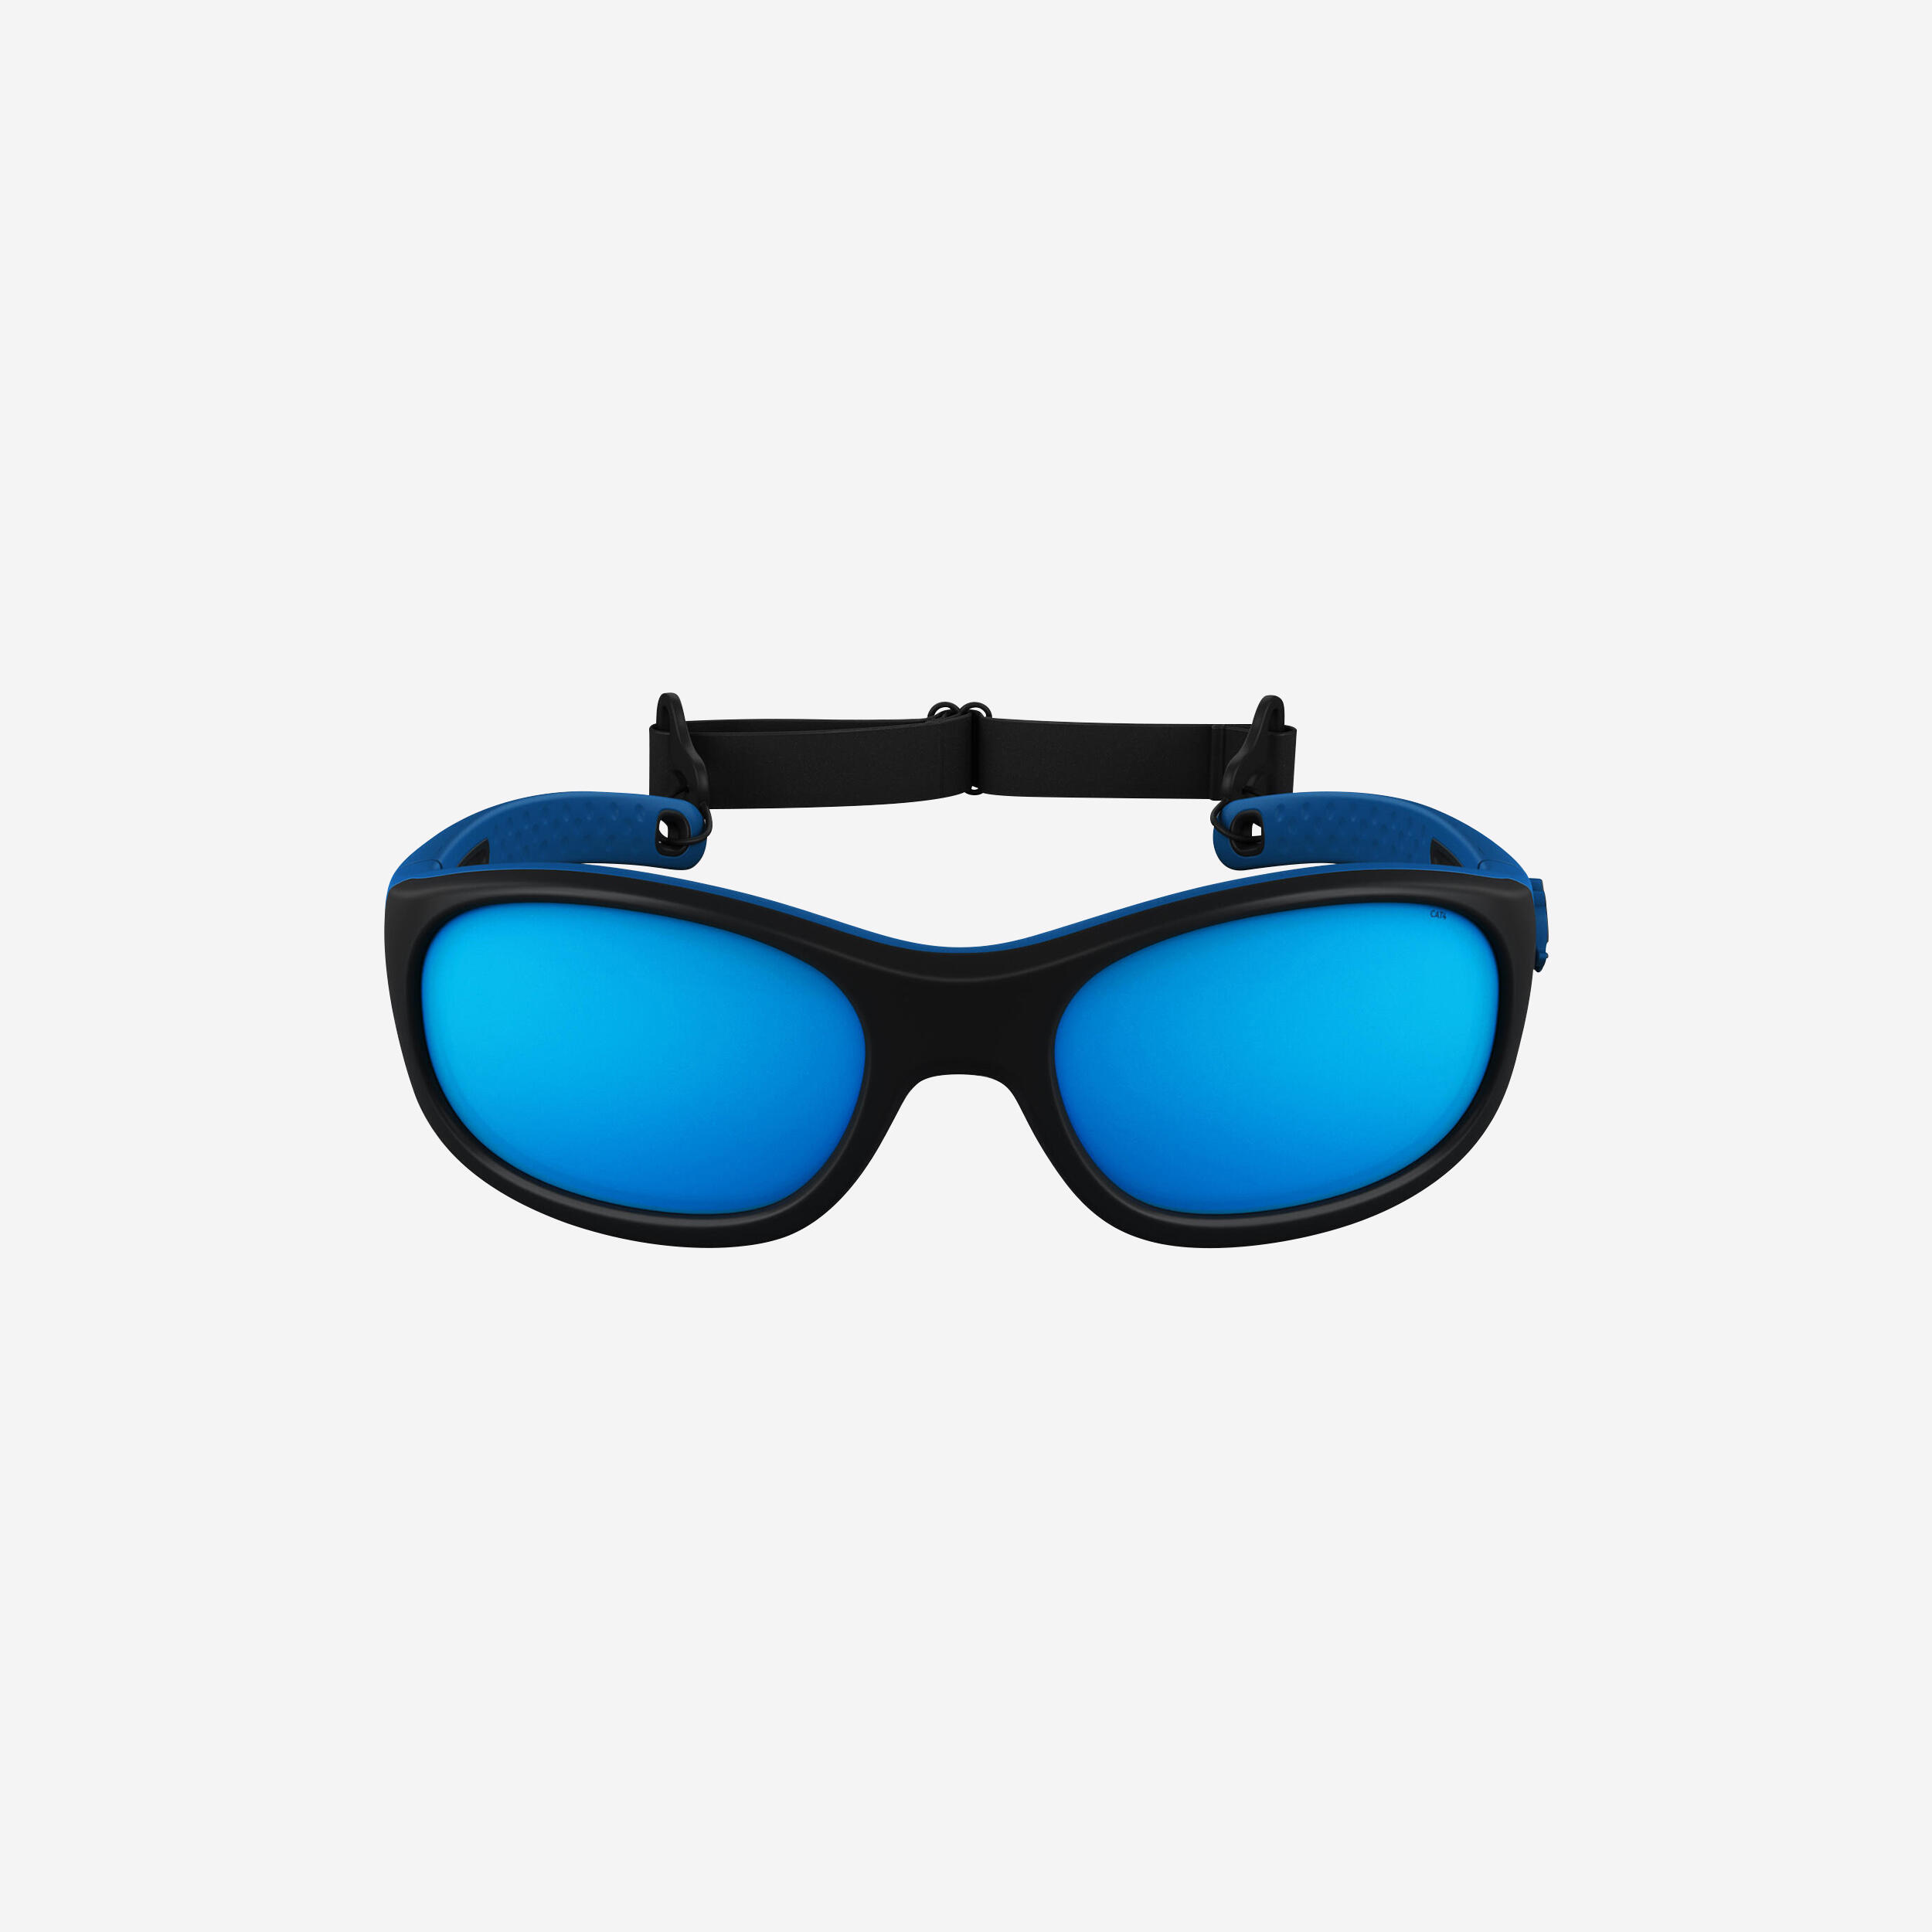 Sunglasses categories and UV protection